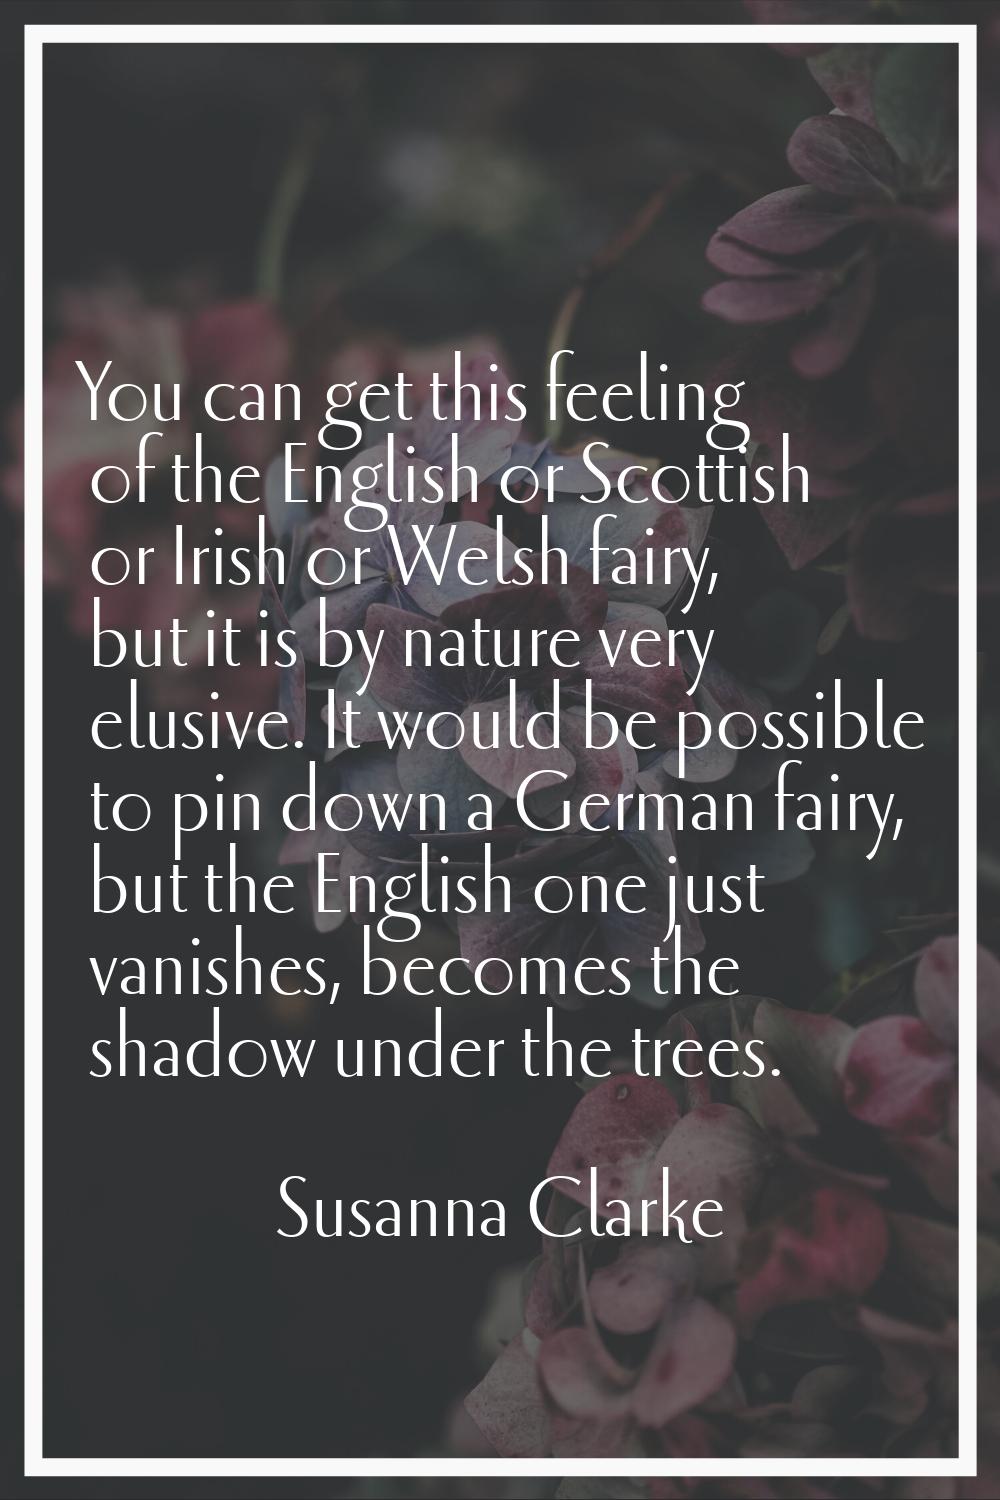 You can get this feeling of the English or Scottish or Irish or Welsh fairy, but it is by nature ve